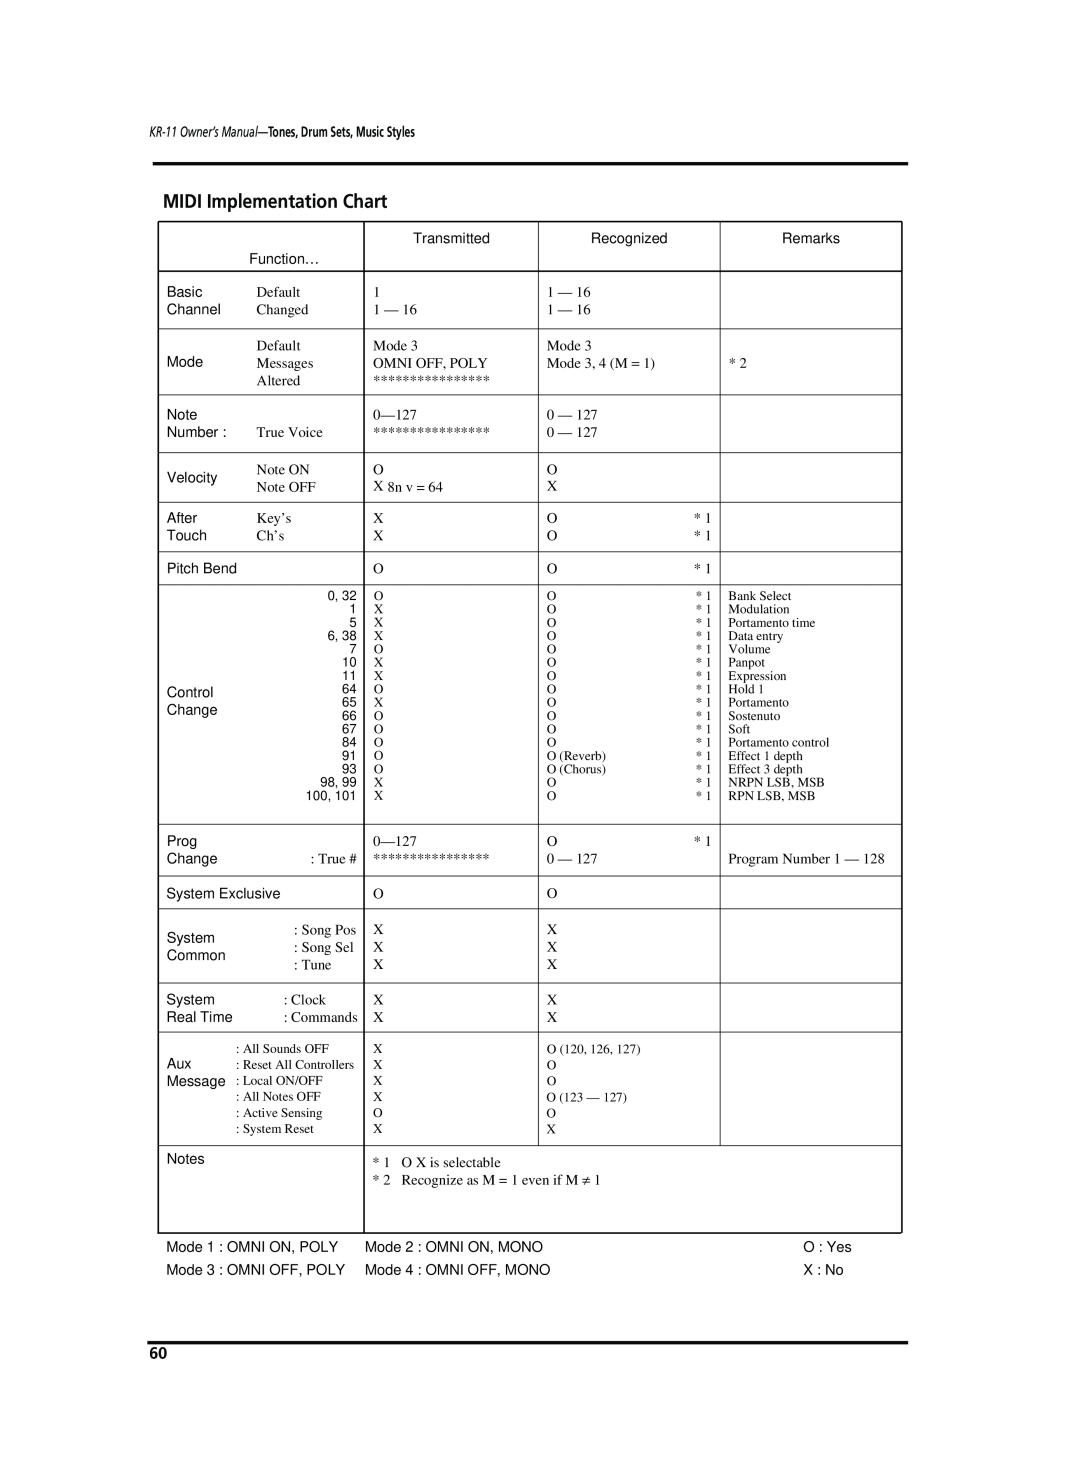 Roland owner manual MIDI Implementation Chart, KR-11 Owner’s Manual-Tones, Drum Sets, Music Styles, Mode 3, 4 M, O 123 